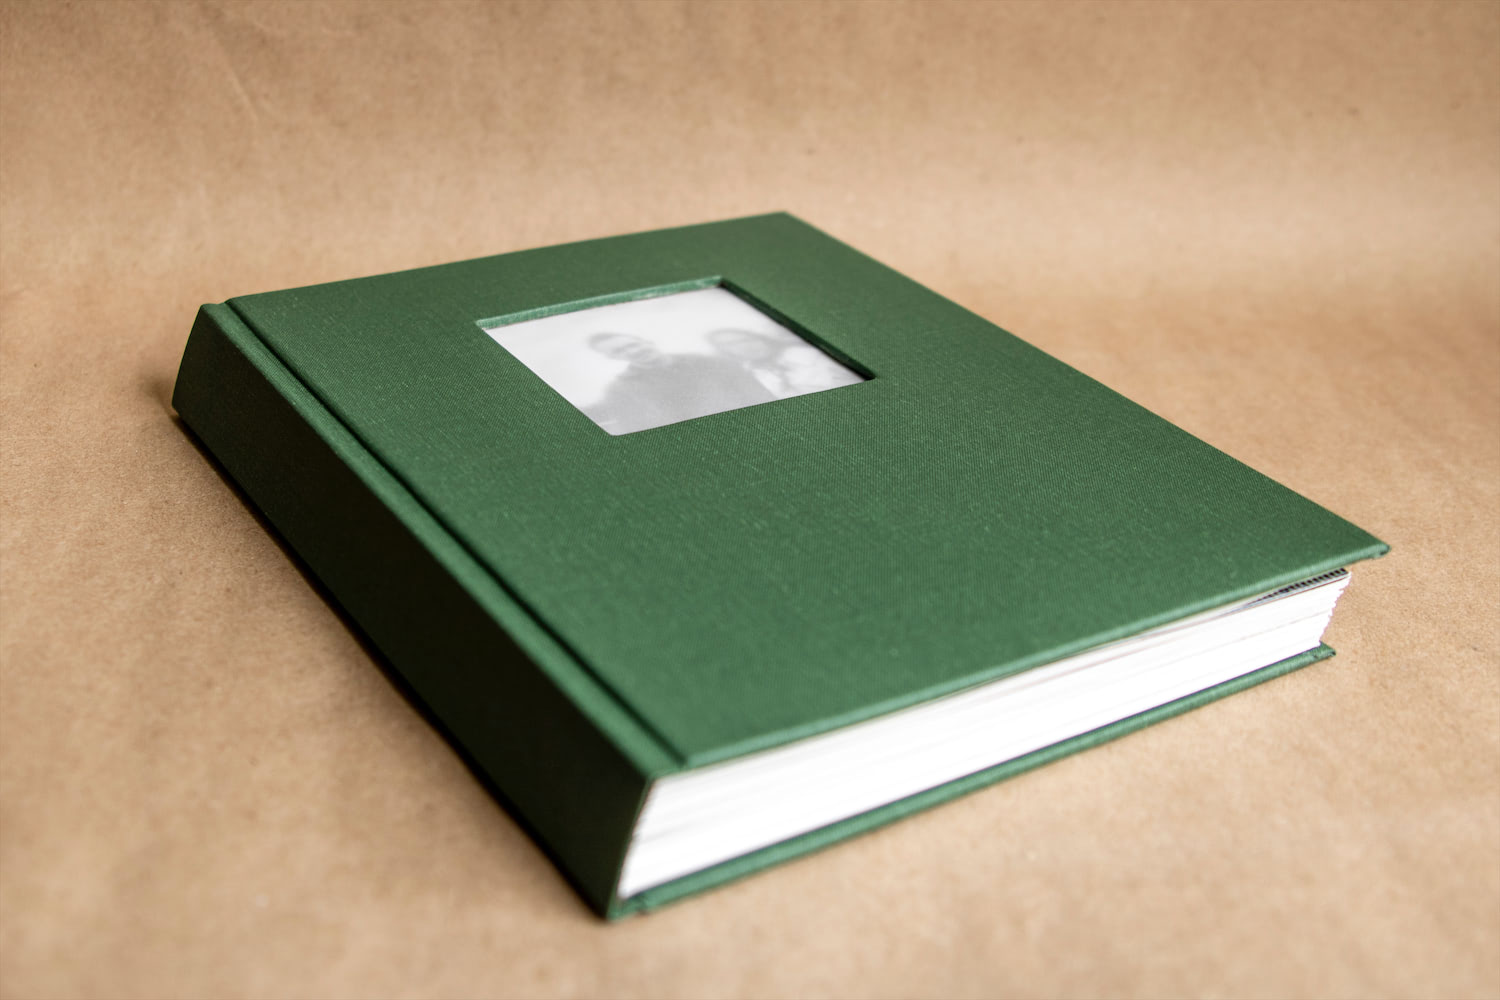 A side view of the drum leaf style book with green bookcloth and an image of two people on the cover.